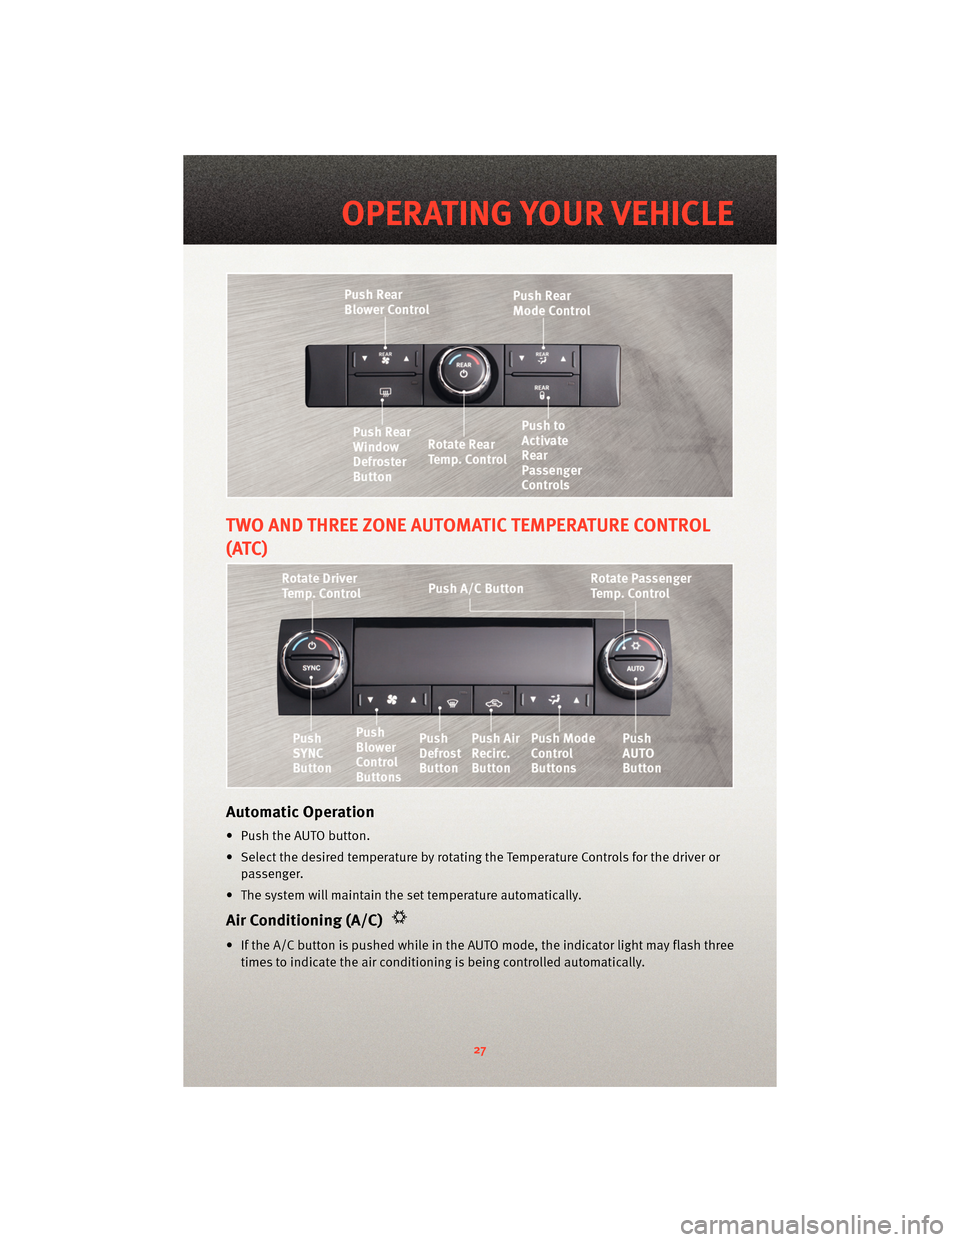 DODGE JOURNEY 2010 1.G User Guide TWO AND THREE ZONE AUTOMATIC TEMPERATURE CONTROL
(ATC)
Automatic Operation
• Push the AUTO button.
• Select the desired temperature by rotating the Temperature Controls for the driver or
passenger